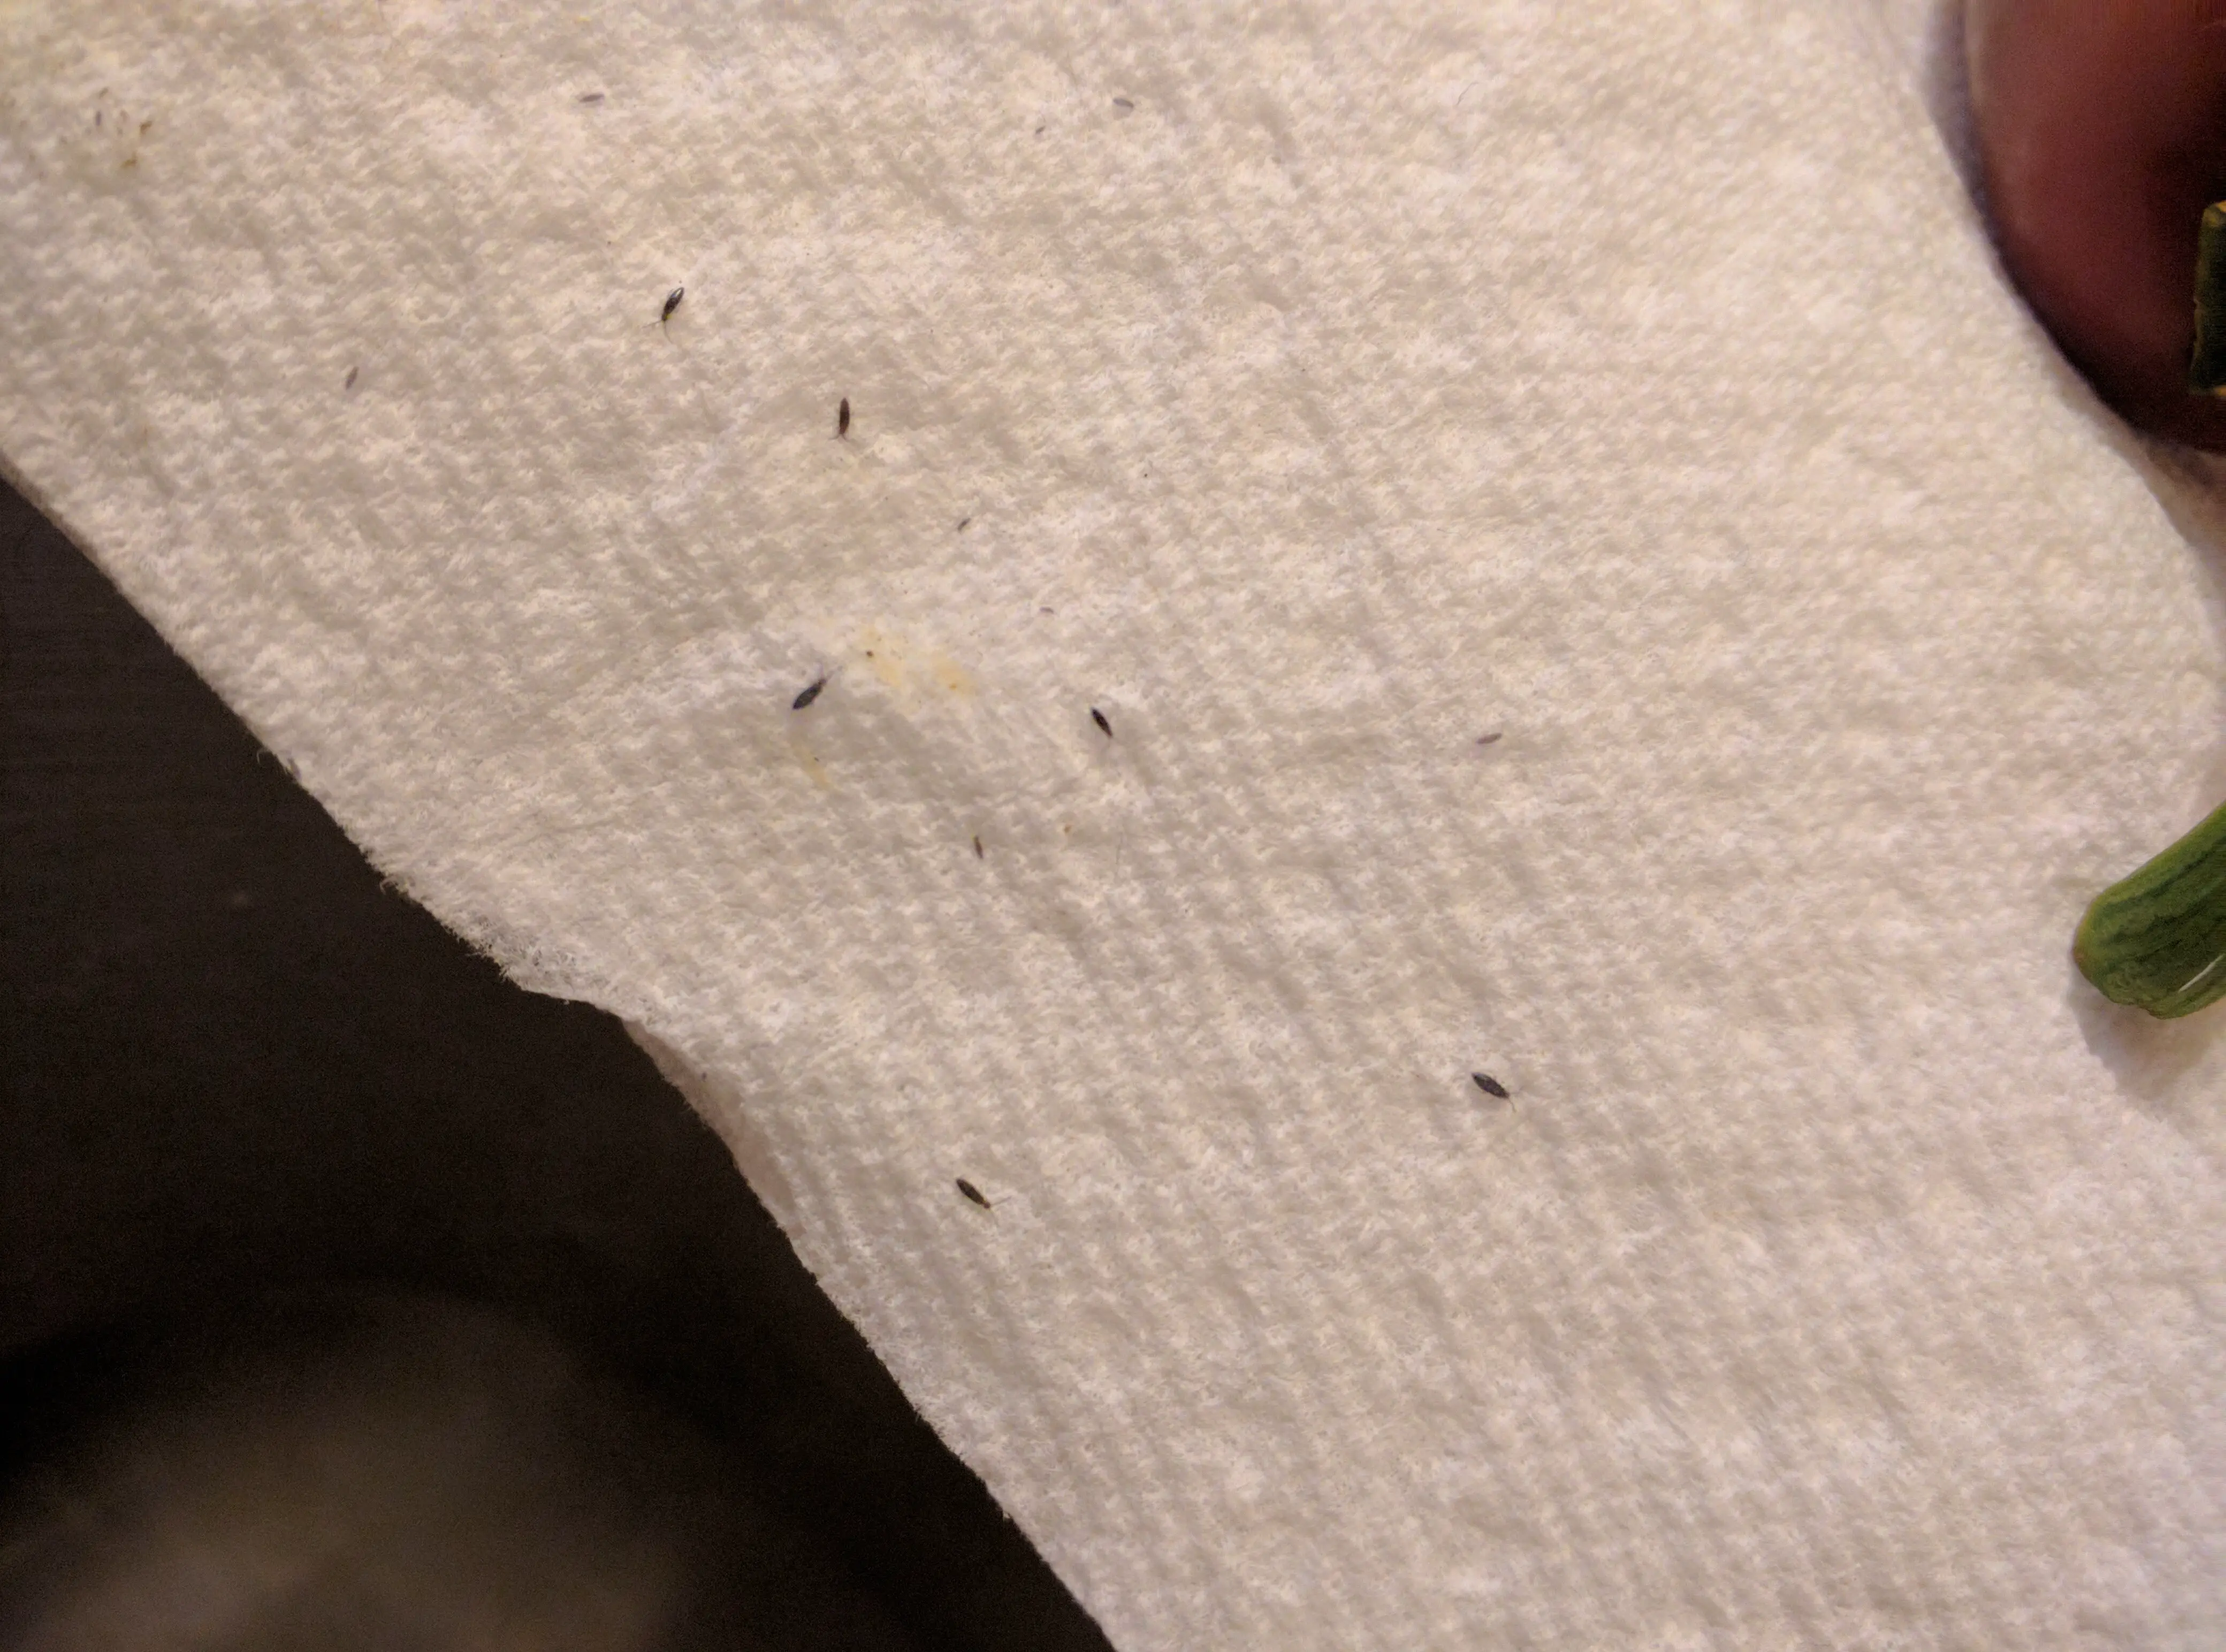 Tiny Black Bugs In Kitchen Pest Guide, How To Get Rid Of Small Kitchen Bugs